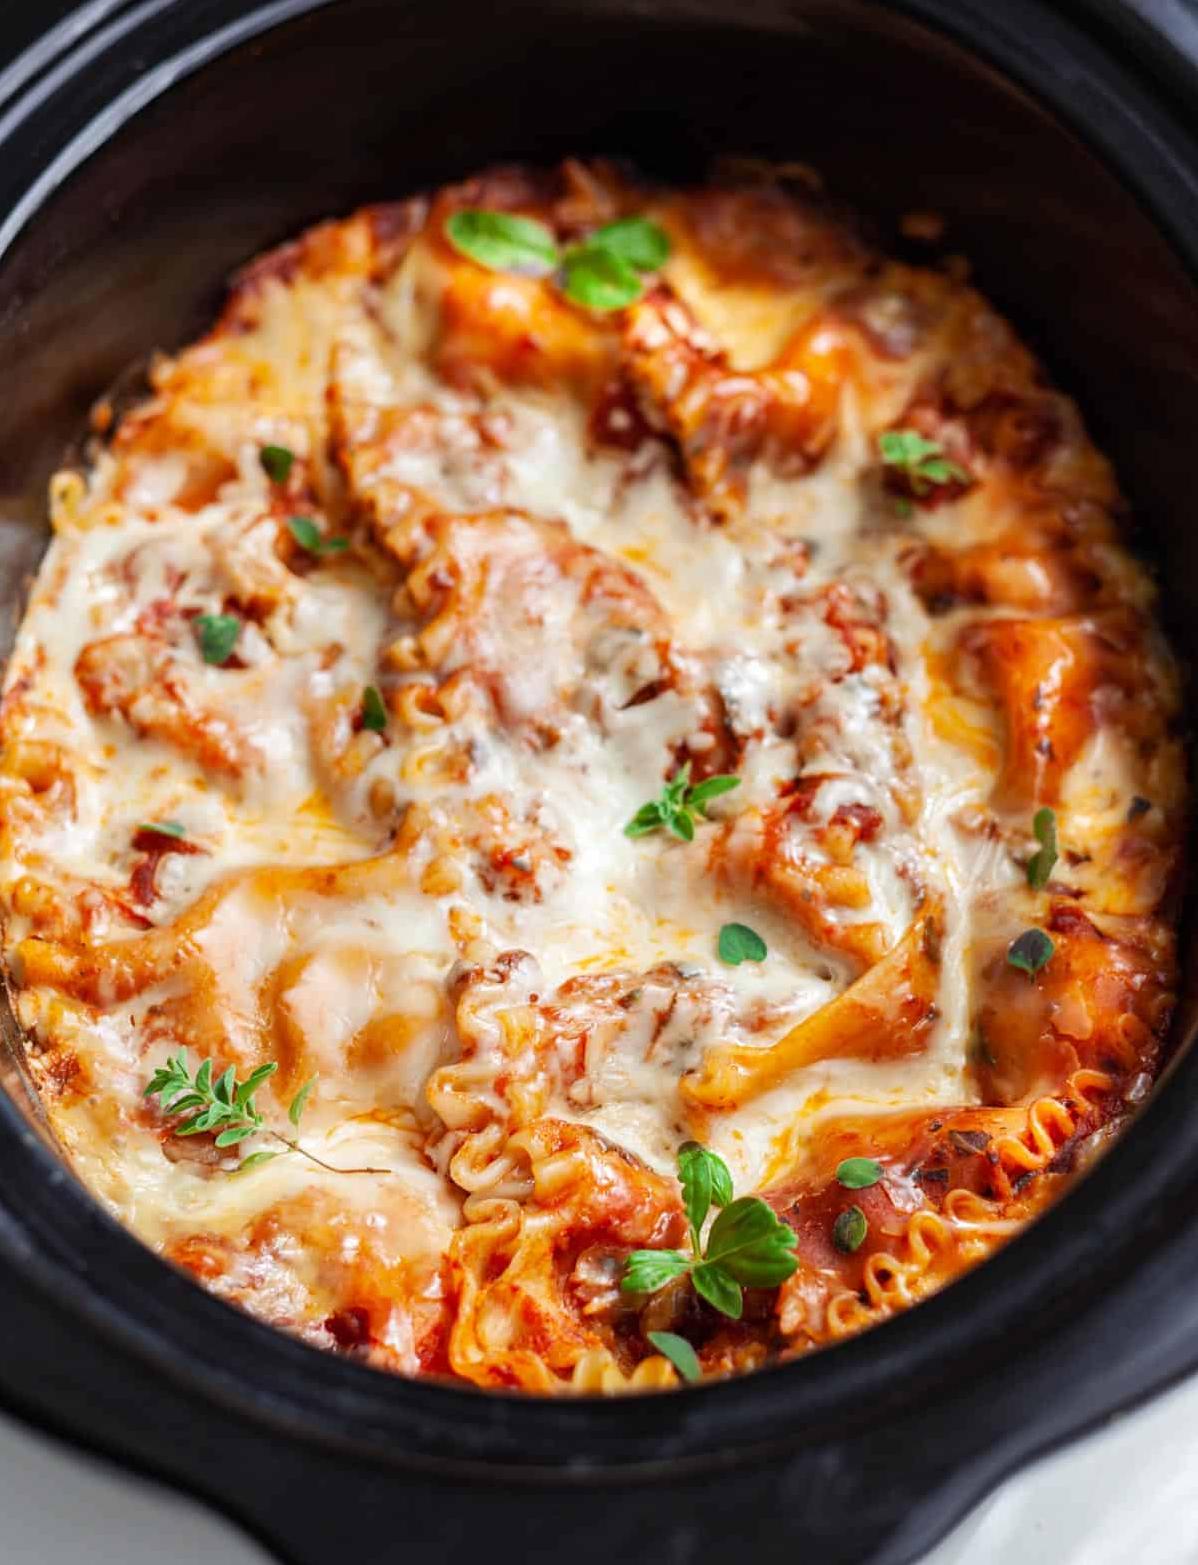  Don't be intimidated by making lasagna from scratch - this recipe is easier than you think!